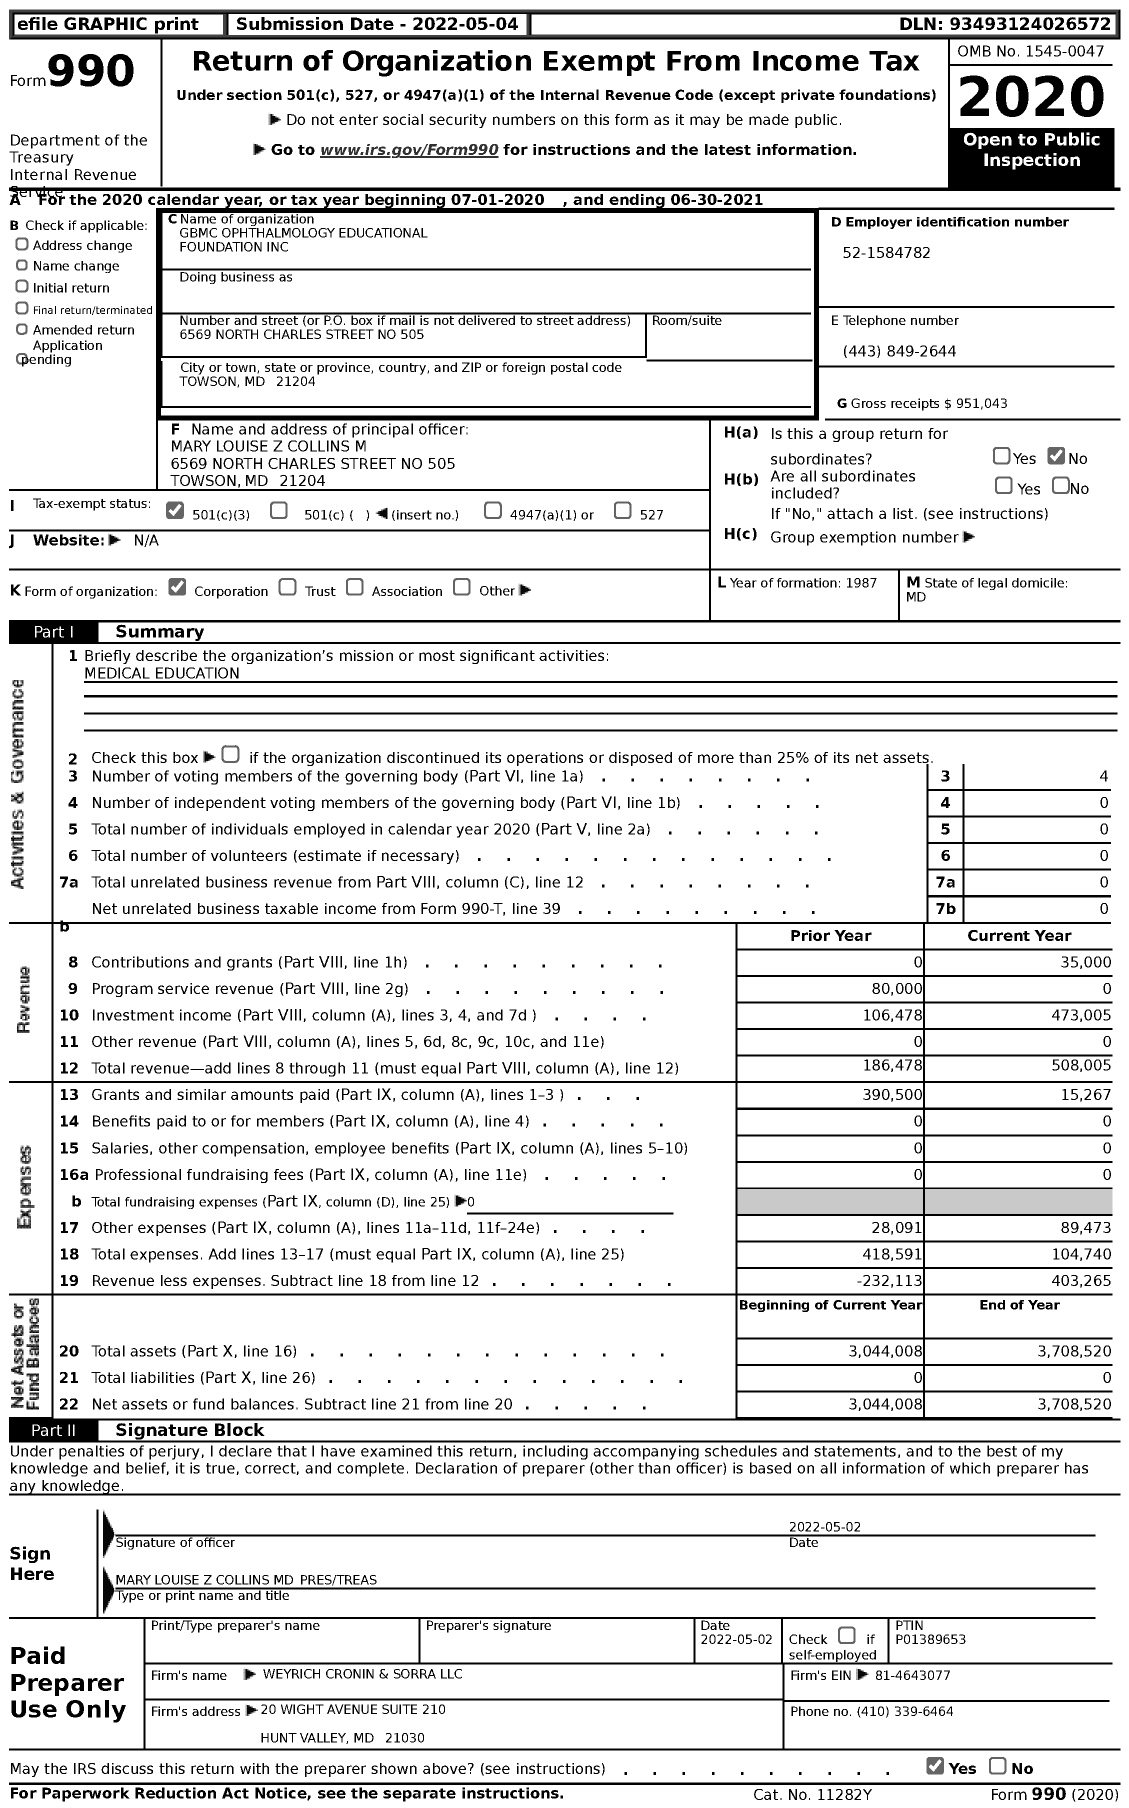 Image of first page of 2020 Form 990 for GBMC Ophthalmology Educational Foundation